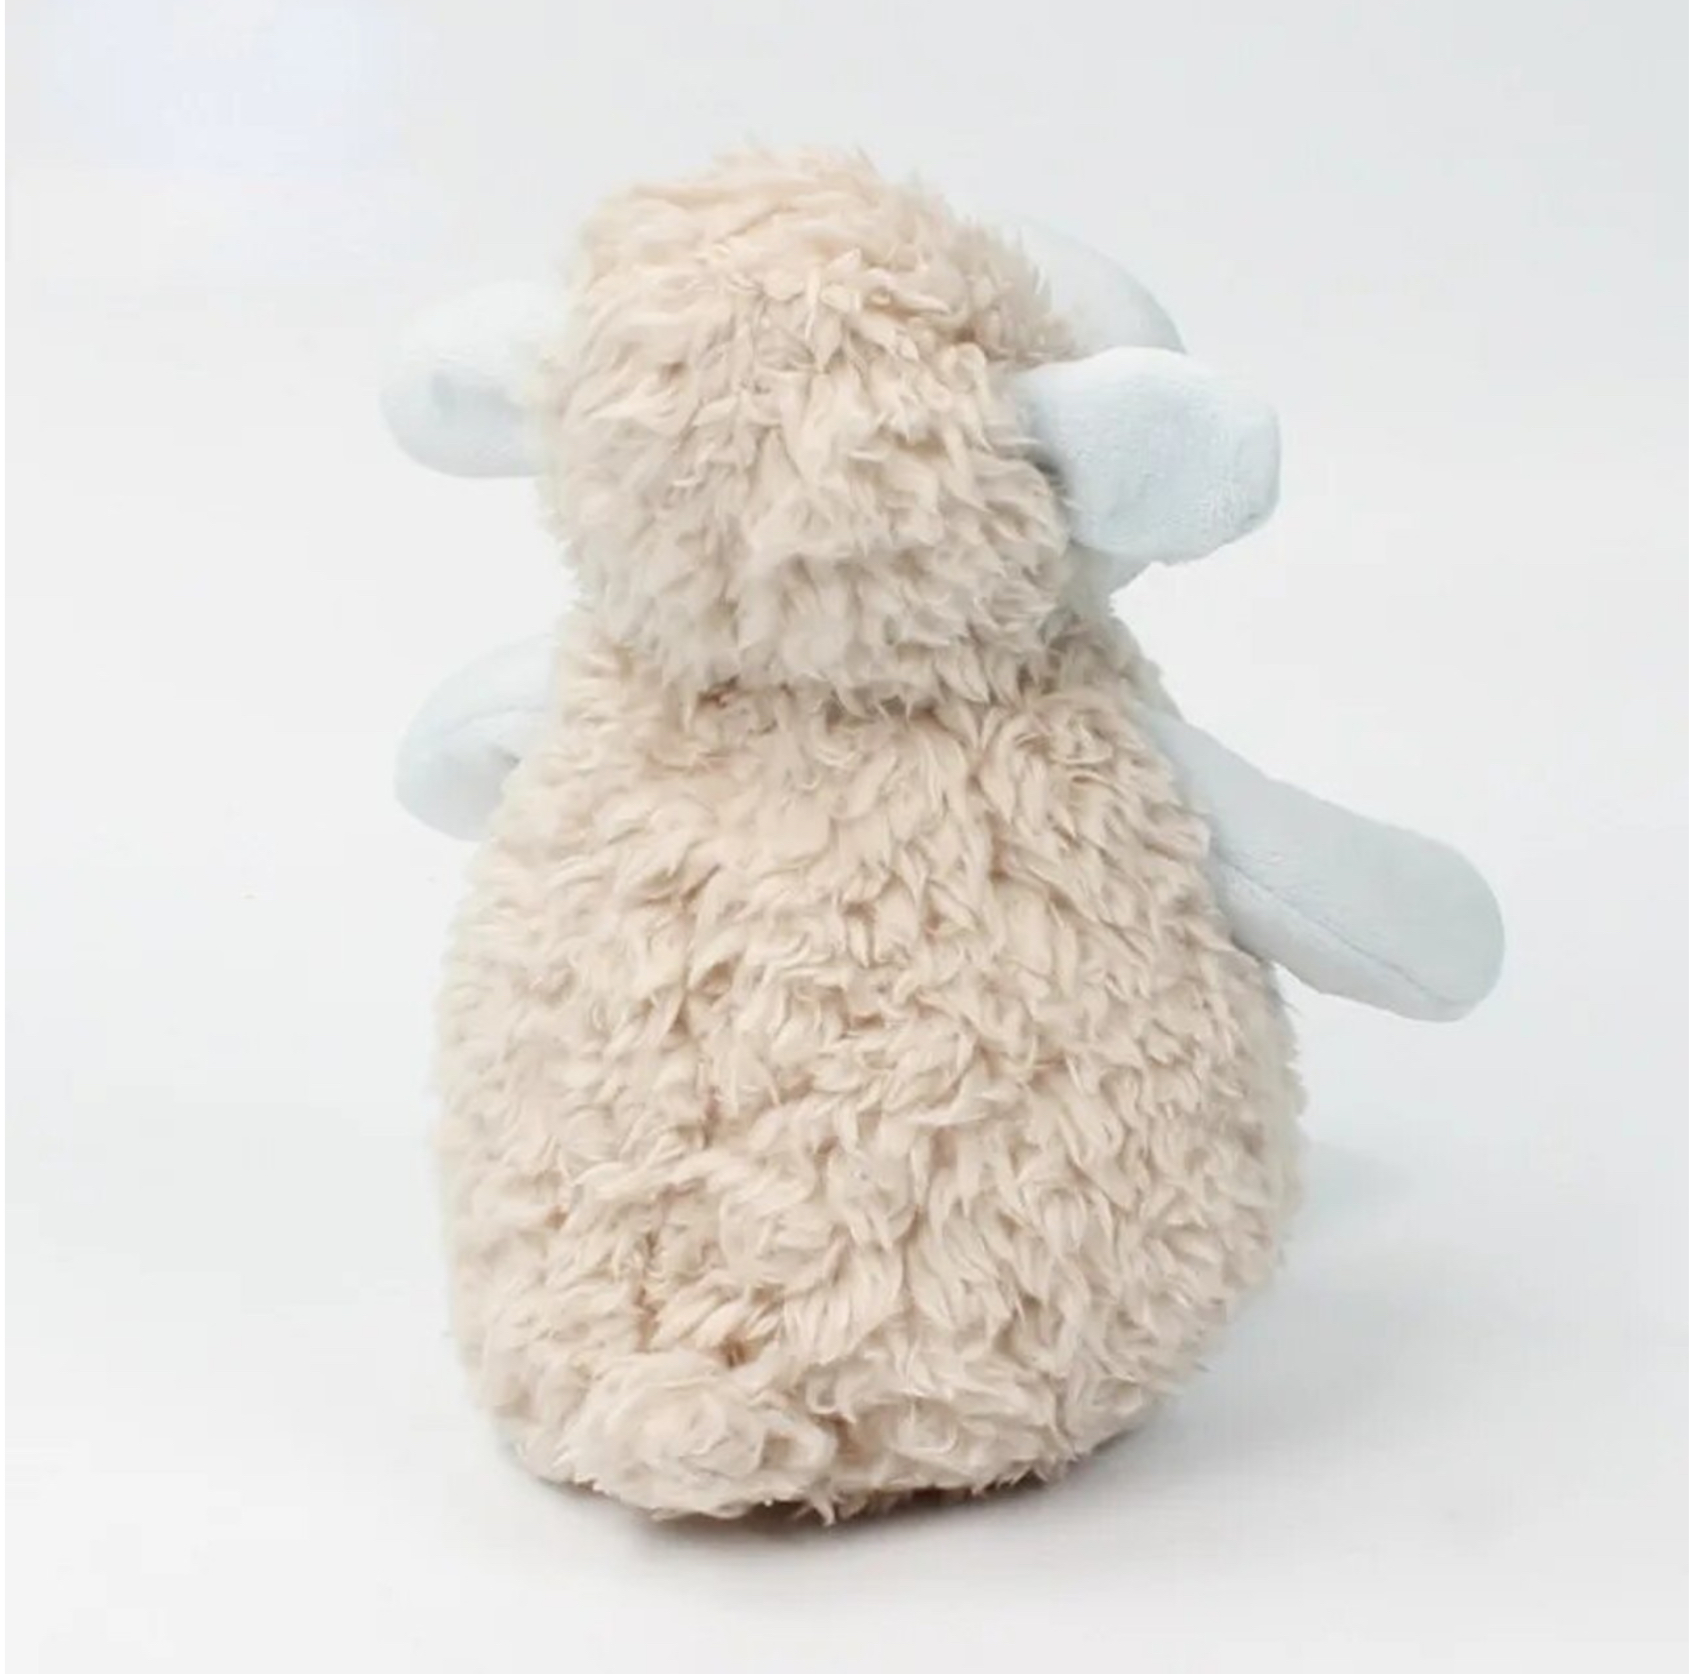 Soft Plushie Lamb  Stuffed Animal Sheep Dolls 23cm For Kids Gift Baby Appease Toy Cute Nap Plush Pillow For Girlfriend Toys Gifts